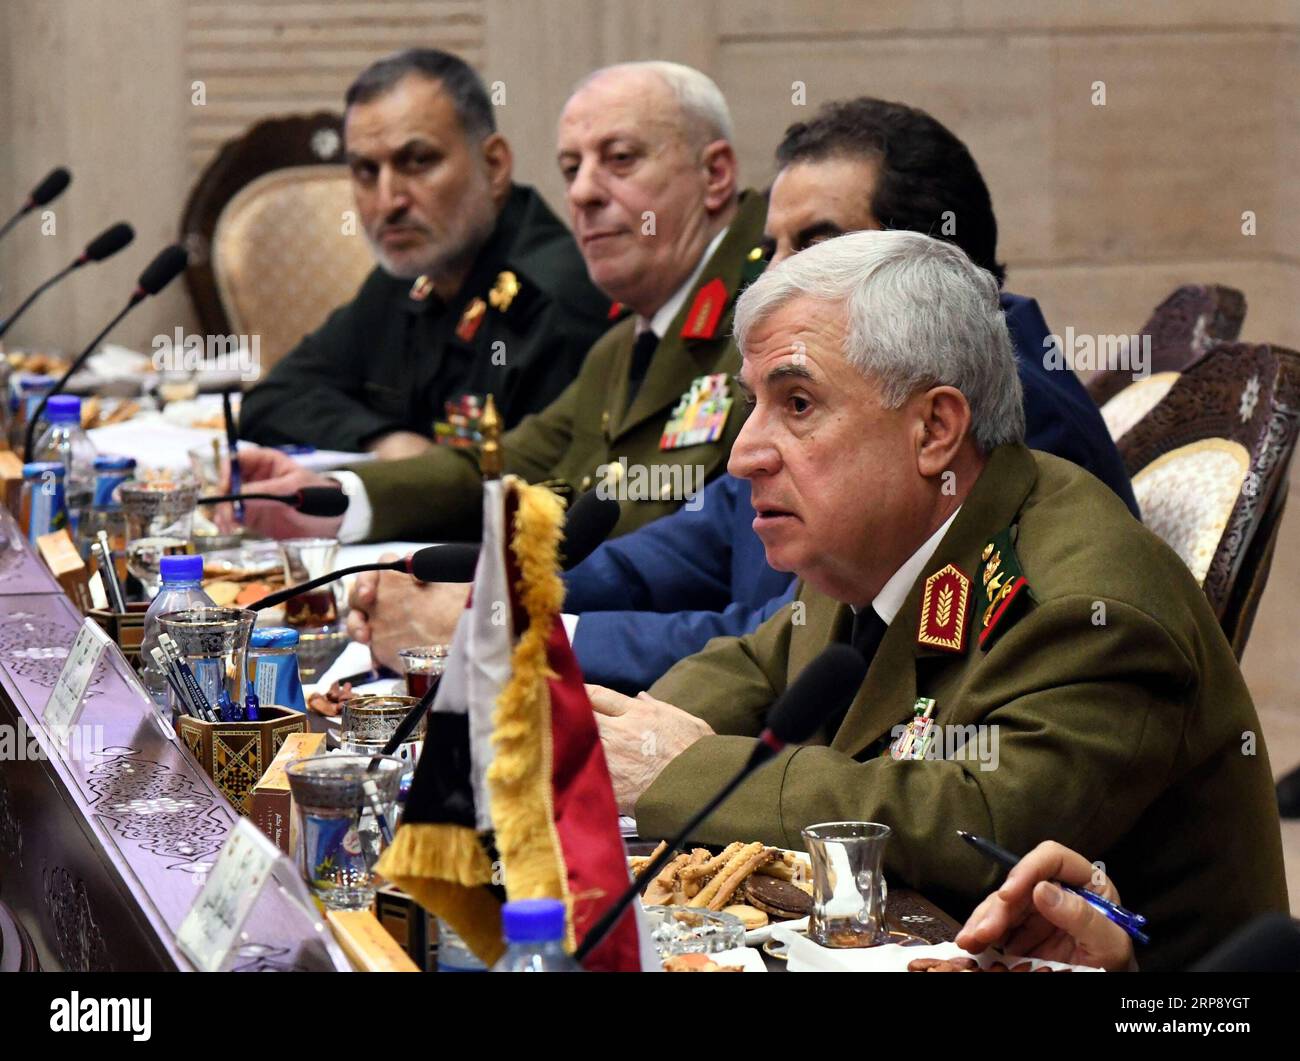 (190318) -- DAMASCUS, March 18, 2019 -- Ali Abdullah Ayyoub (R), the Syrian defense minister, attends a meeting with the chiefs of staff of Iraq and Iran in Damascus, capital of Syria, March 18, 2019. The Syrian official said on Monday that the Syrian state will completely wrest control over all of Syria sooner or later, noting that there will be no inch of Syria out of the government control. ) SYRIA-DAMASCUS-IRAN-IRAQ-MILITARY-MEETING AmmarxSafarjalani PUBLICATIONxNOTxINxCHN Stock Photo